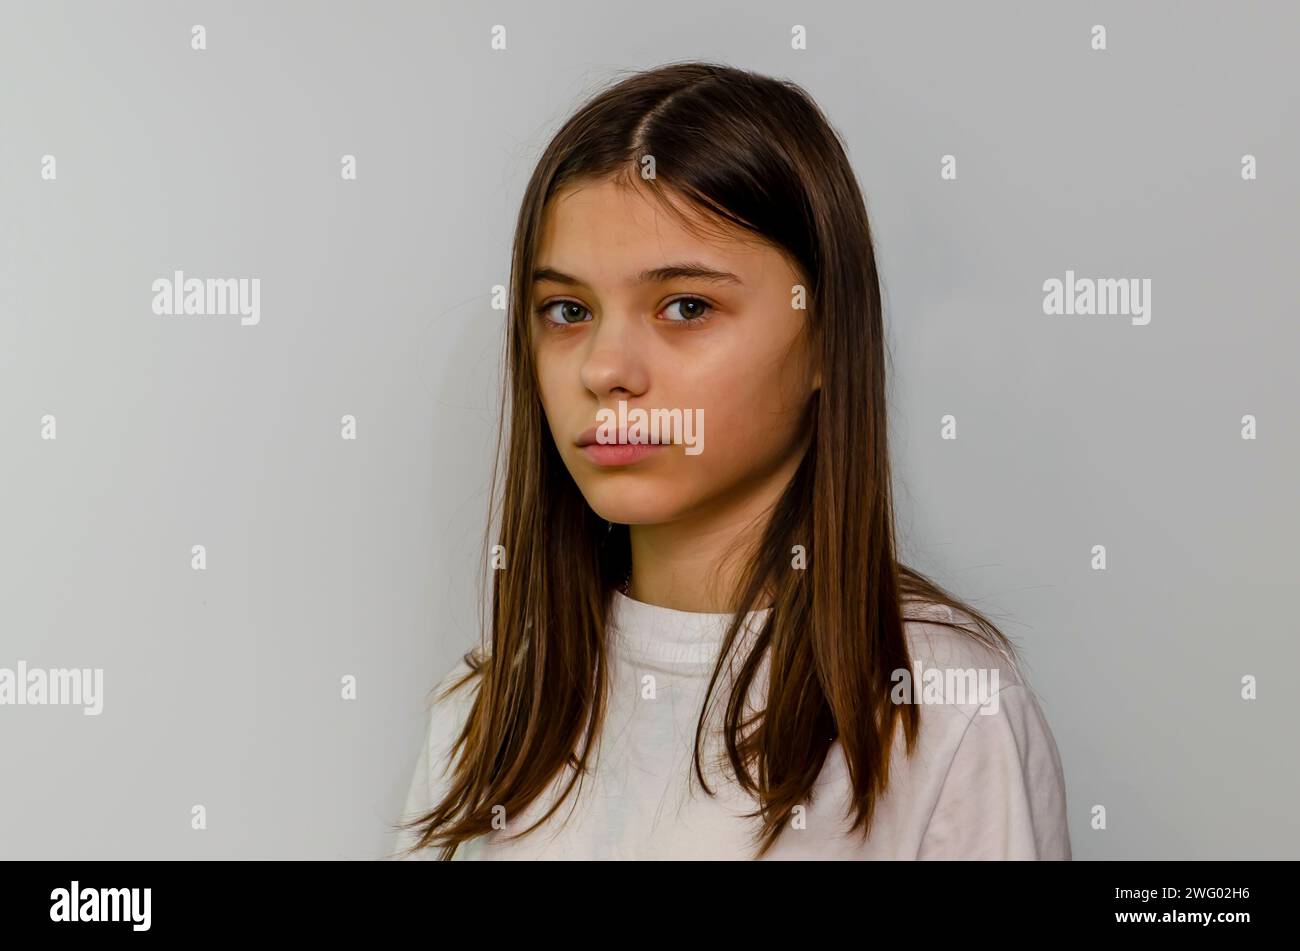 A teenage girl with long hair wearing a white t-shirt looks at the camera against a light colored background. Stock Photo